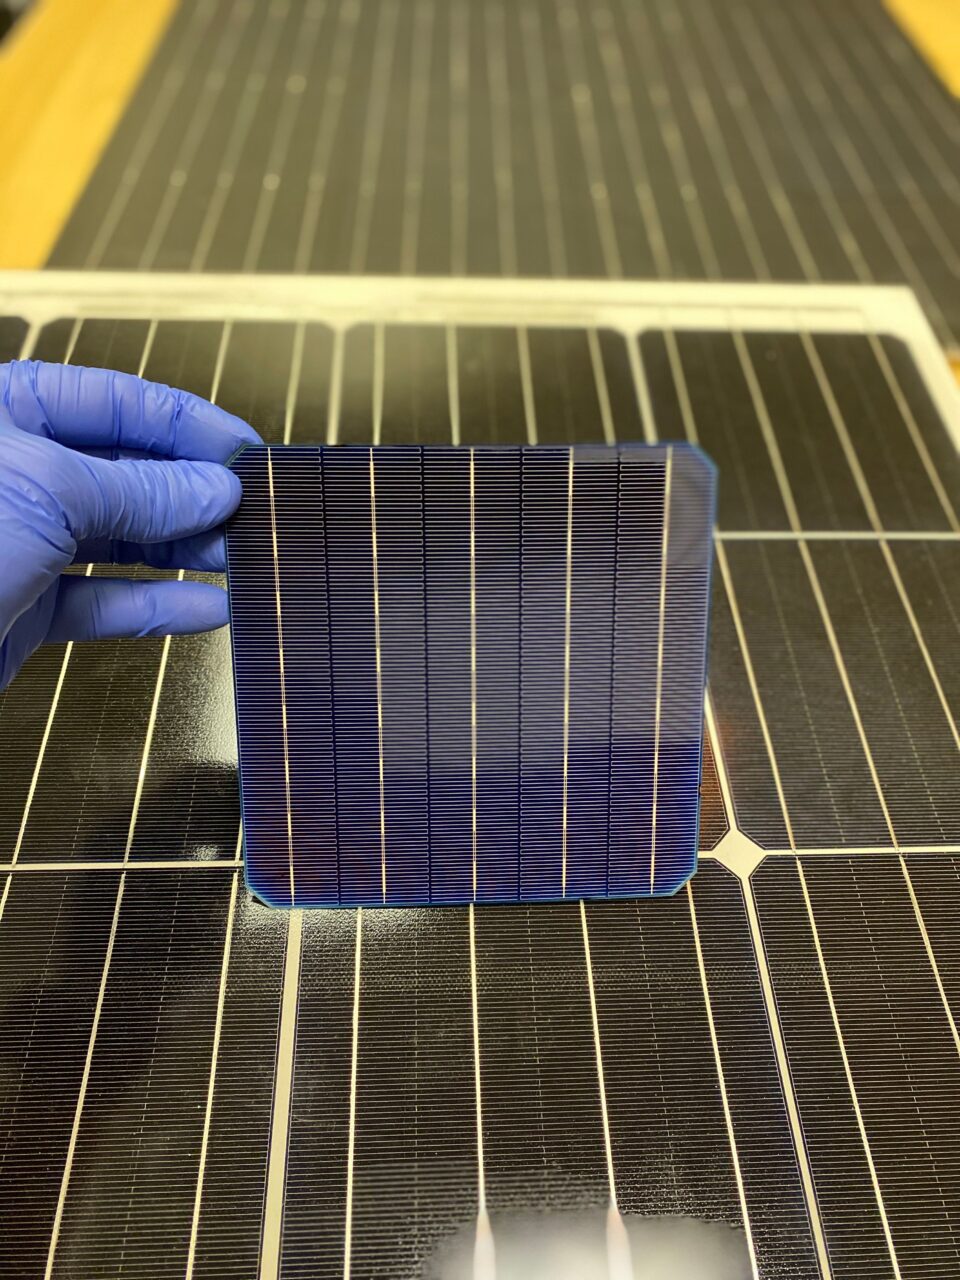 New Solar Technology Promises Improved Performance, Cost Savings